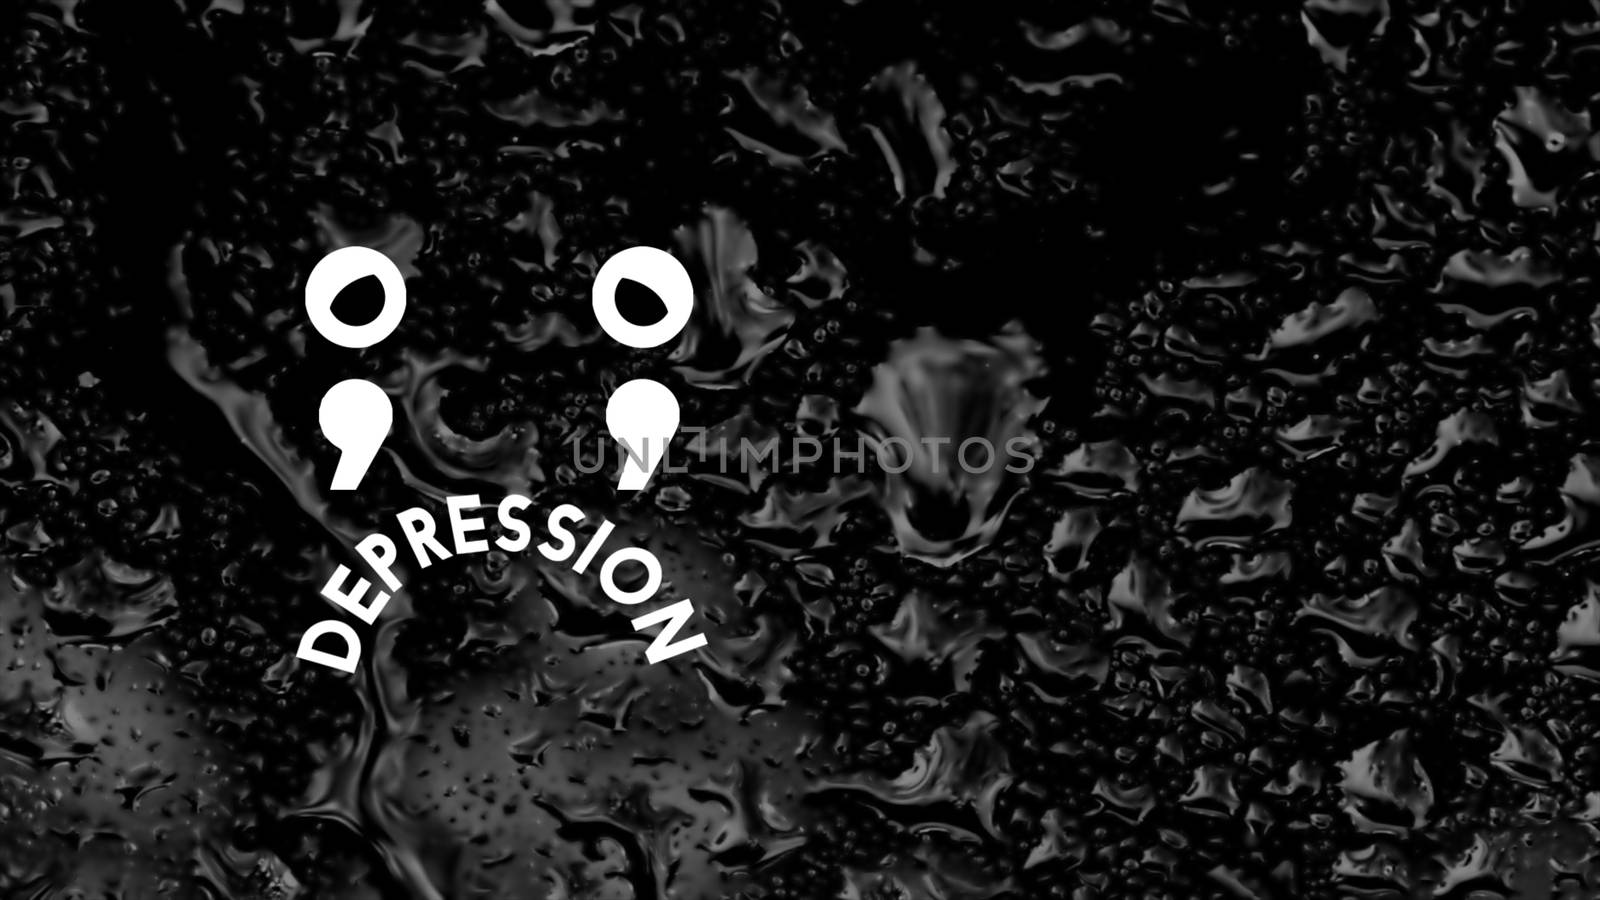 A couple of animated semicolons that looks like a sad face with rain on the background. Depression concept. by oasisamuel